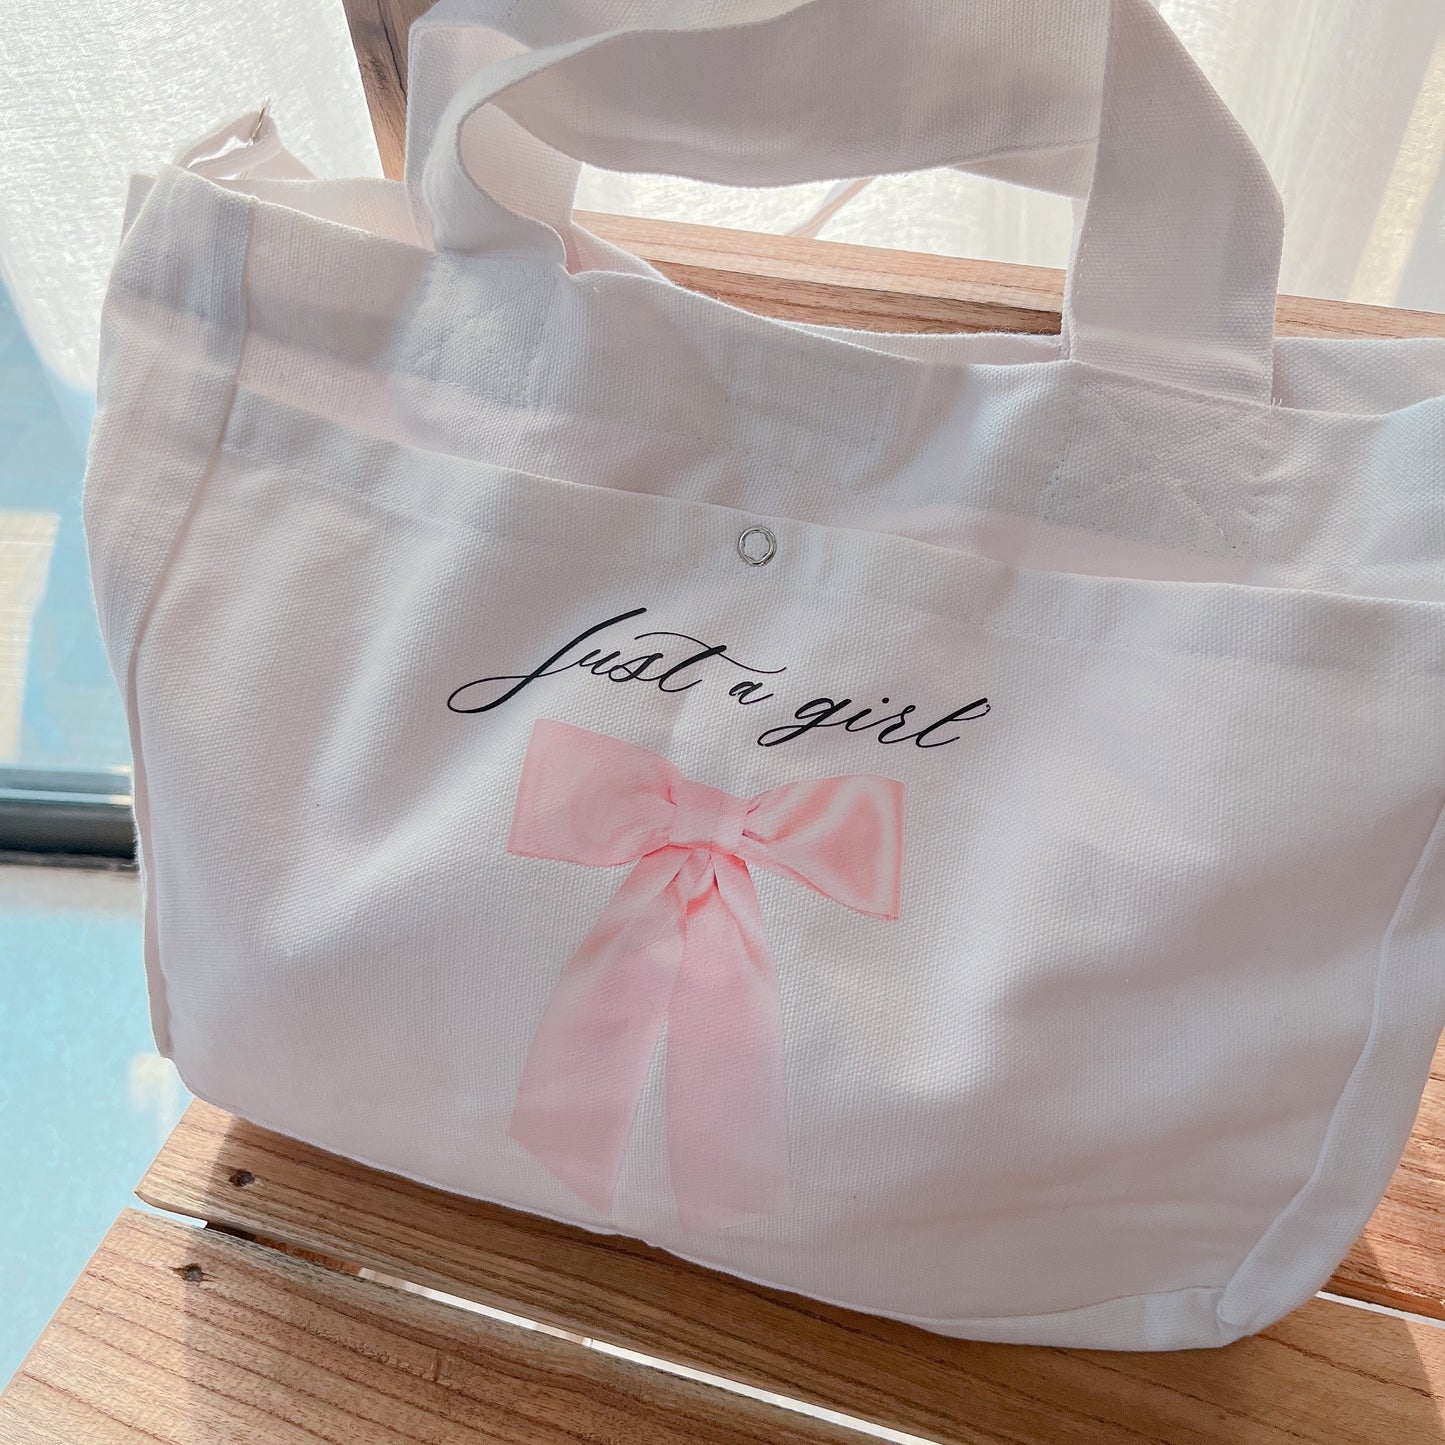 Just a girl Mini Totebag with sling